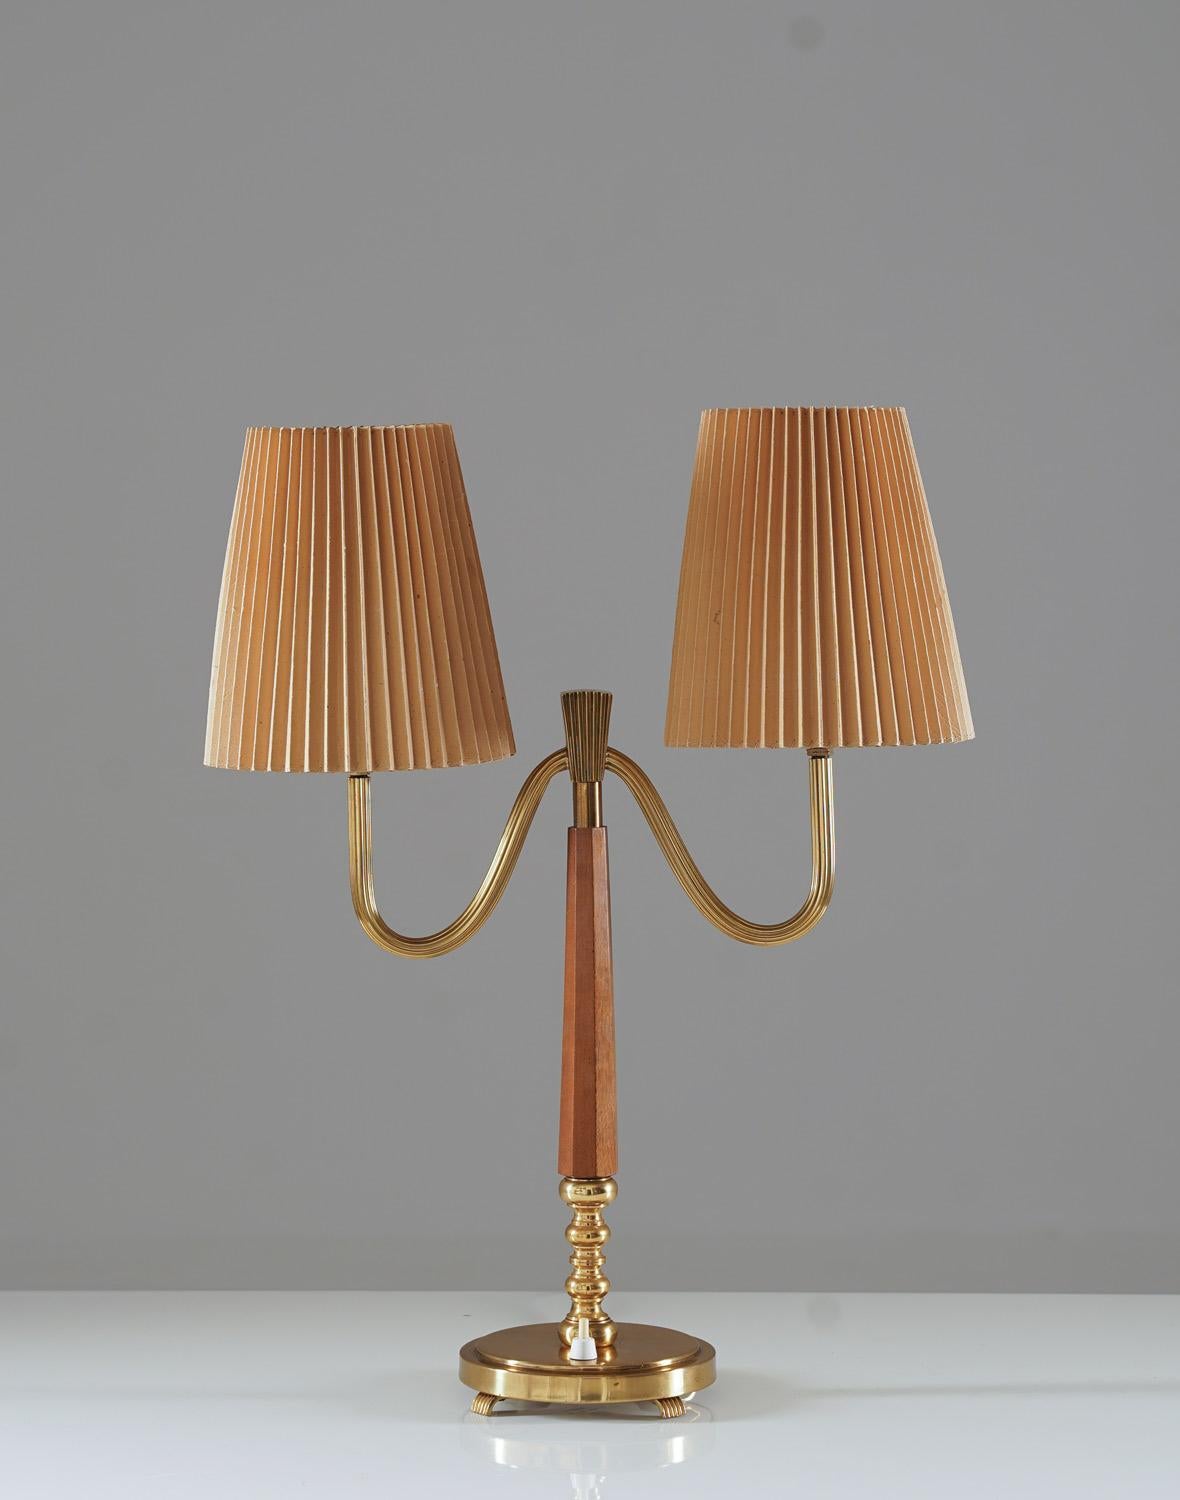 Swedish modern table lamp model 15455 from Böhlmarks Lampfabrik.
This lamp features two light sources, hidden by pleated paper shades that are resting on frosted glass discs. 

Condition: Very good condition. The shades are not original, but is